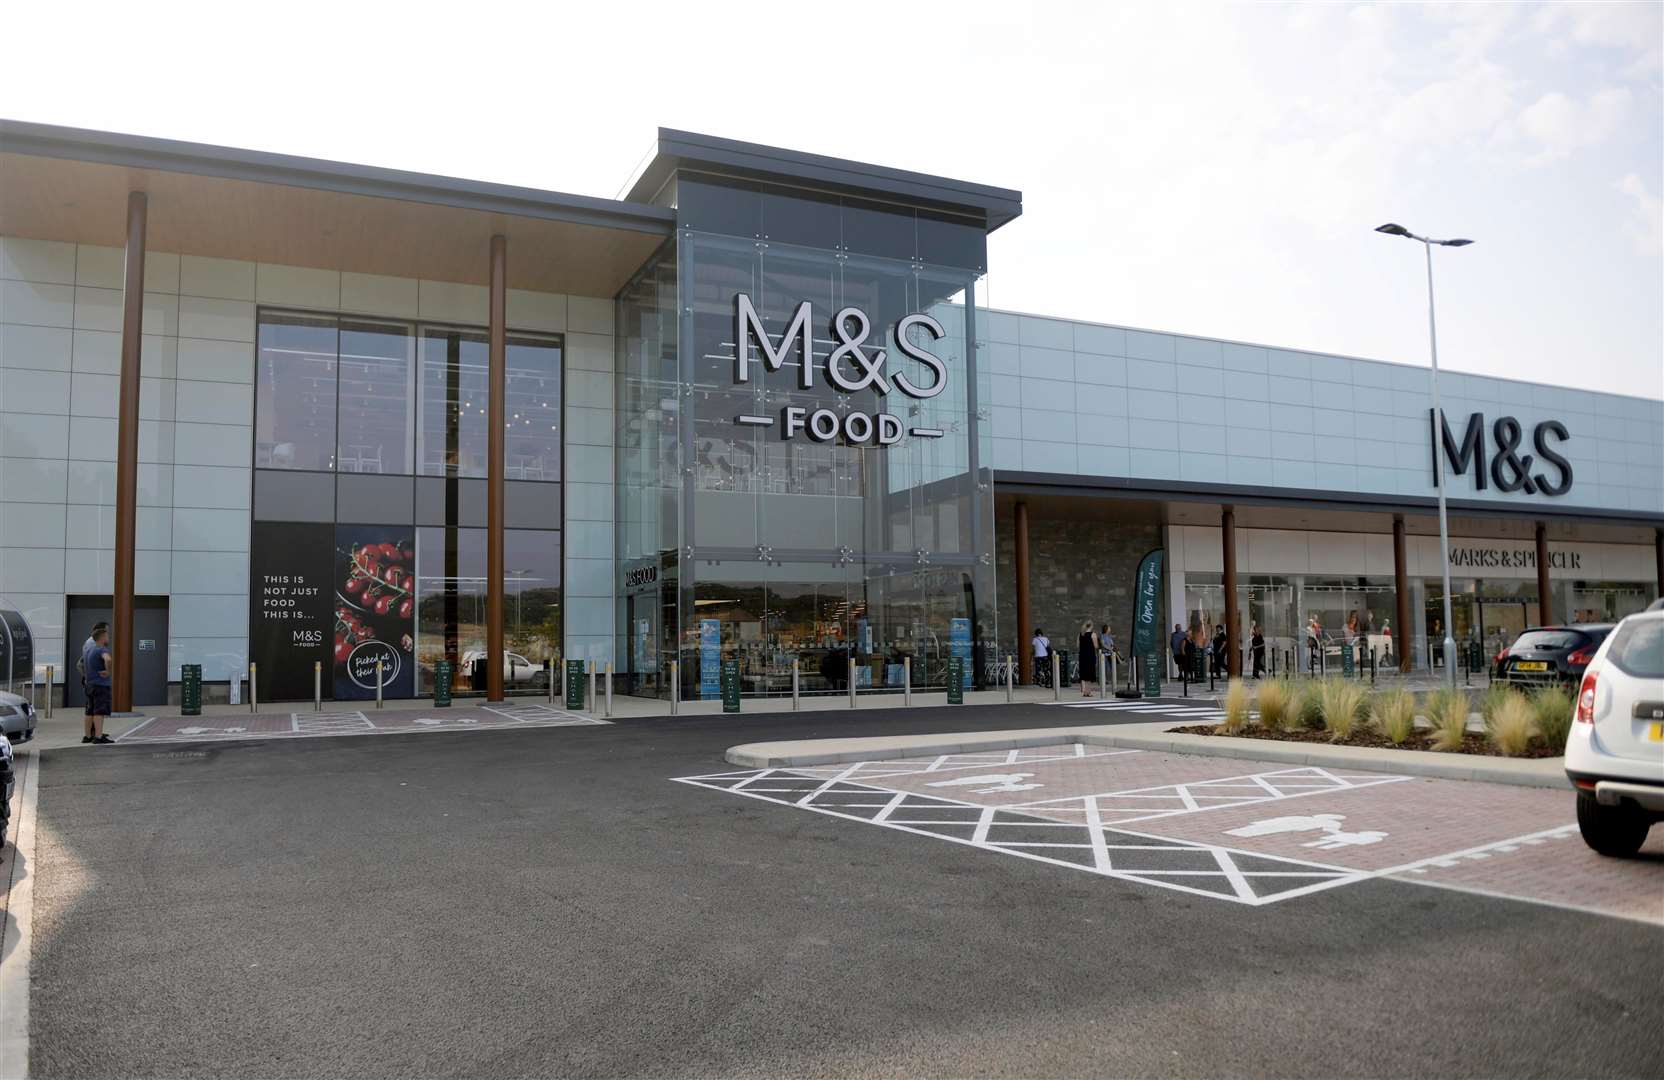 A known shoplifter is suspected to have stolen from the M&S at Eclipse Park